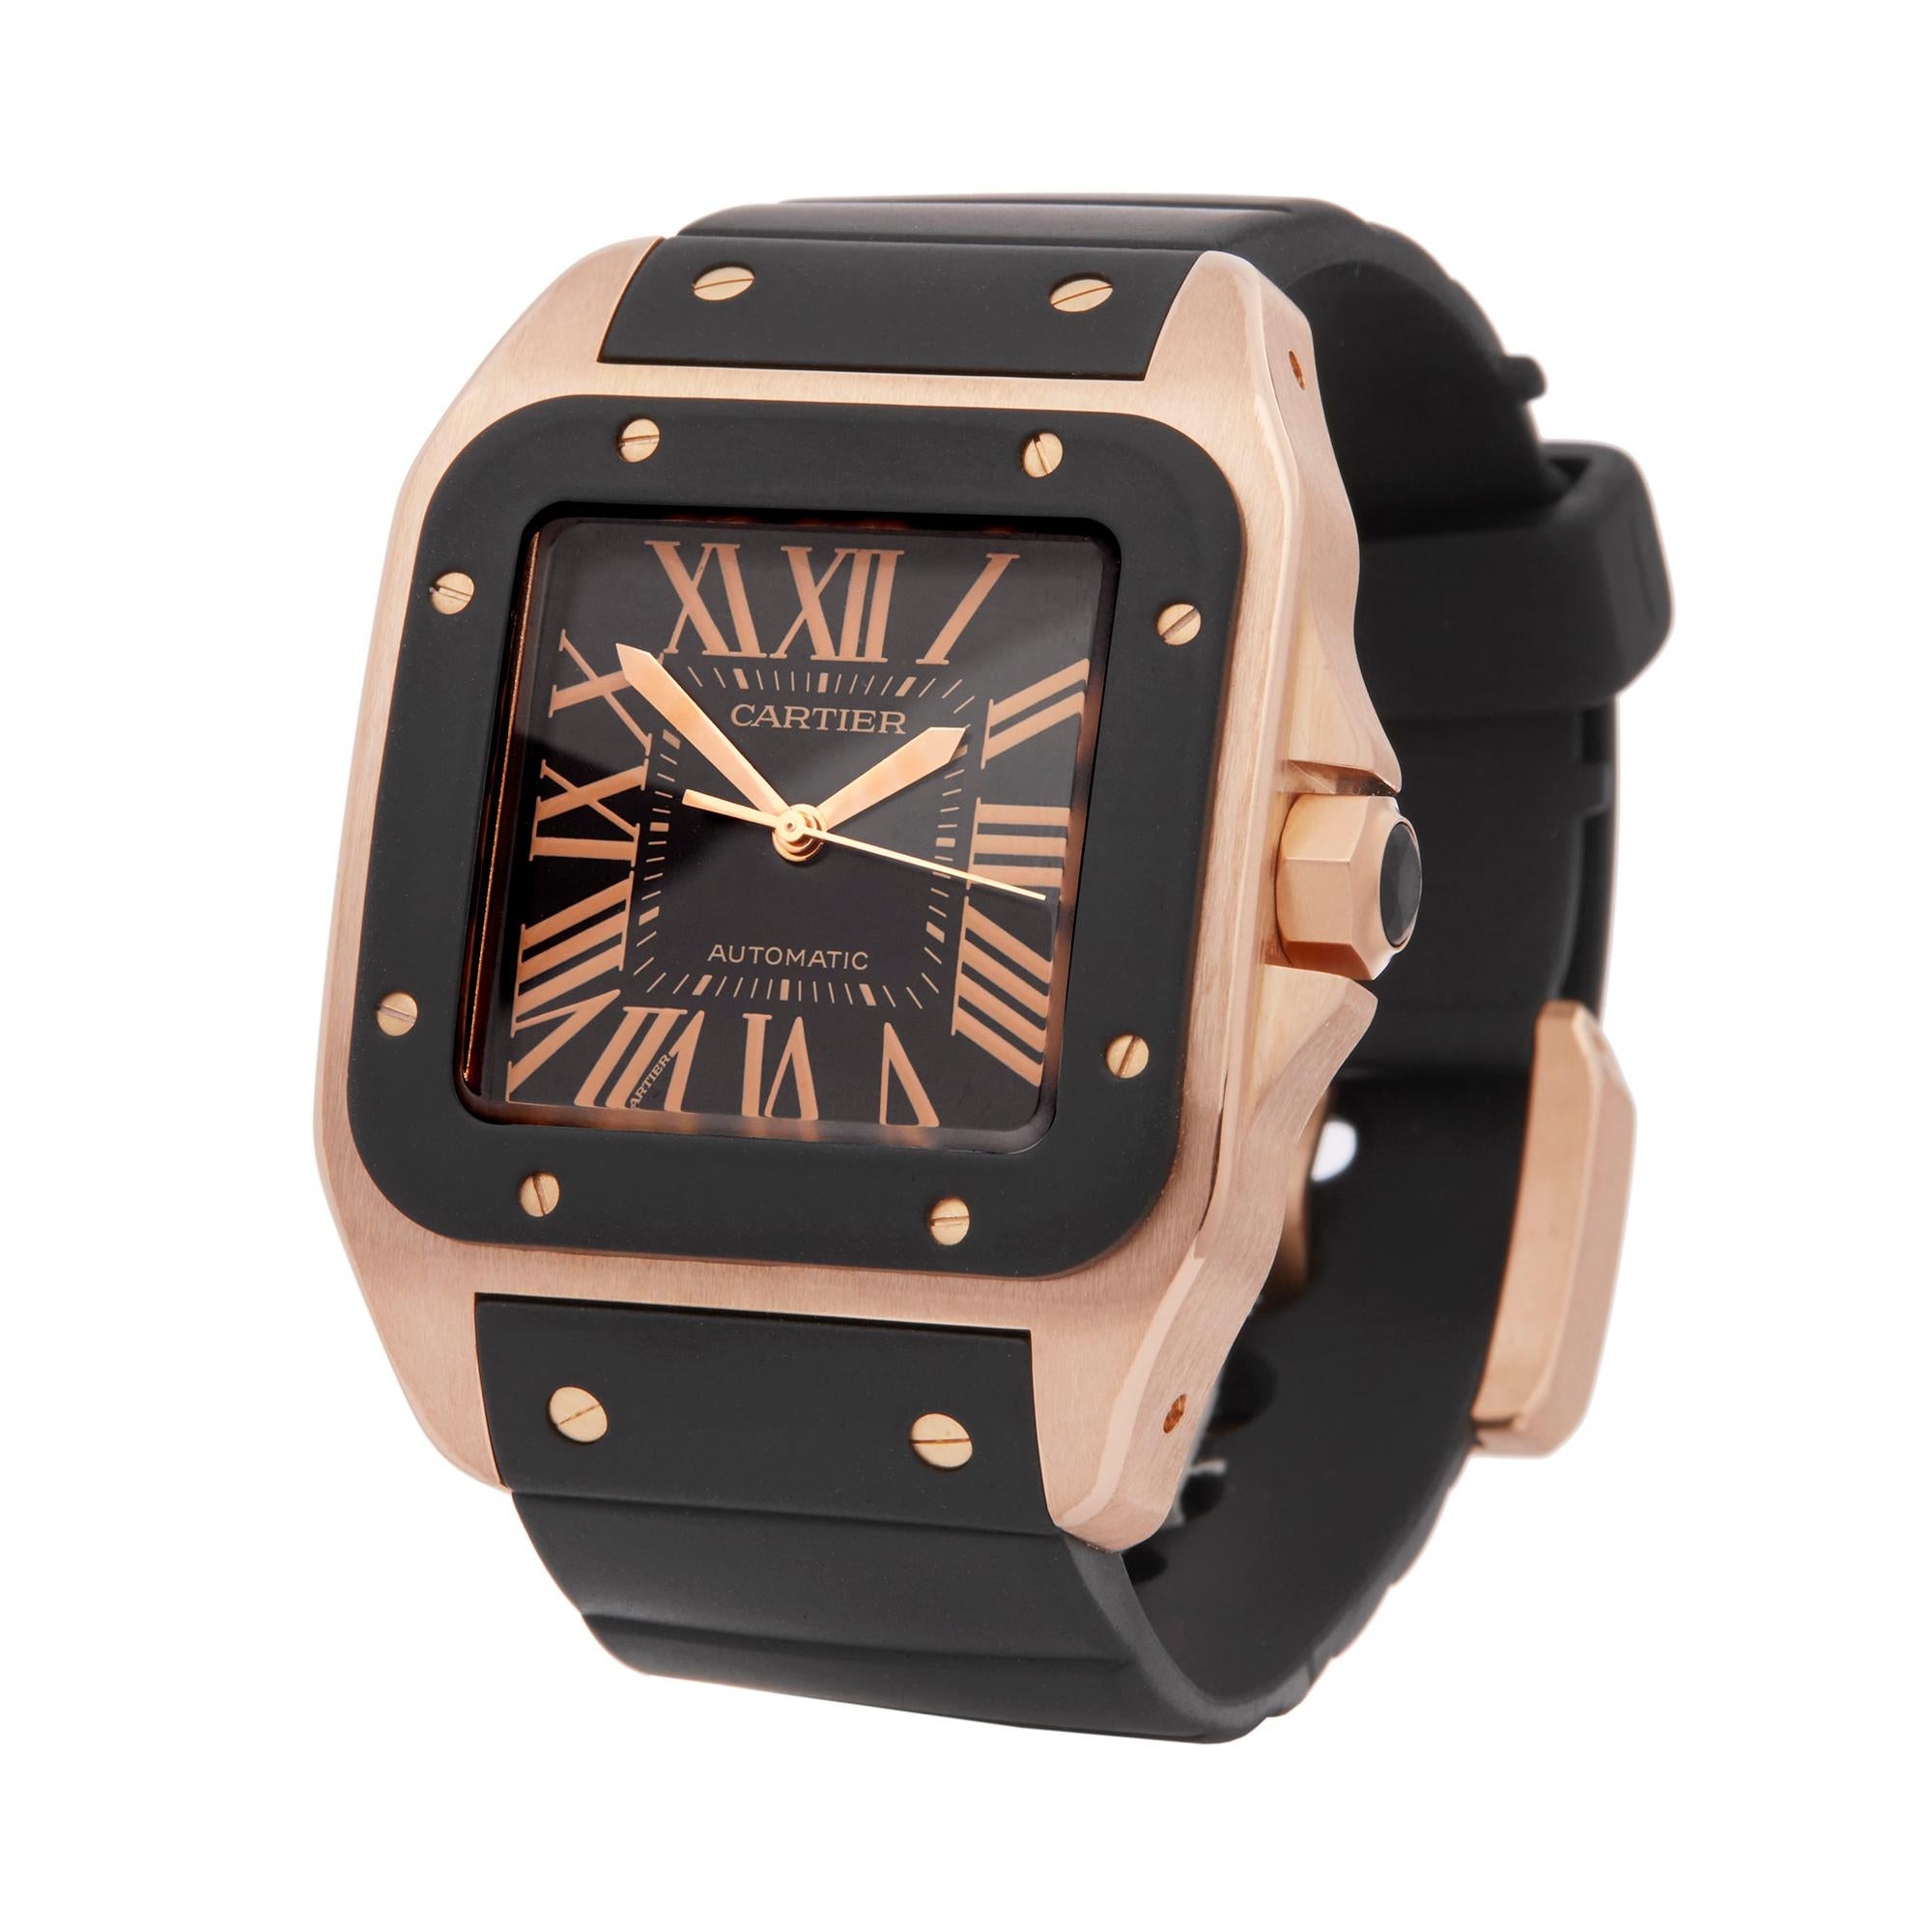 Reference: W6020
Manufacturer: Cartier
Model: Santos de Cartier
Model Reference: W20124U2 or 2792
Age: 1st October 2008
Gender: Men's
Box and Papers: Box, Manuals, Guarantee, Service Pouch and Service Guarantee dated 12th April 2019
Dial: Black